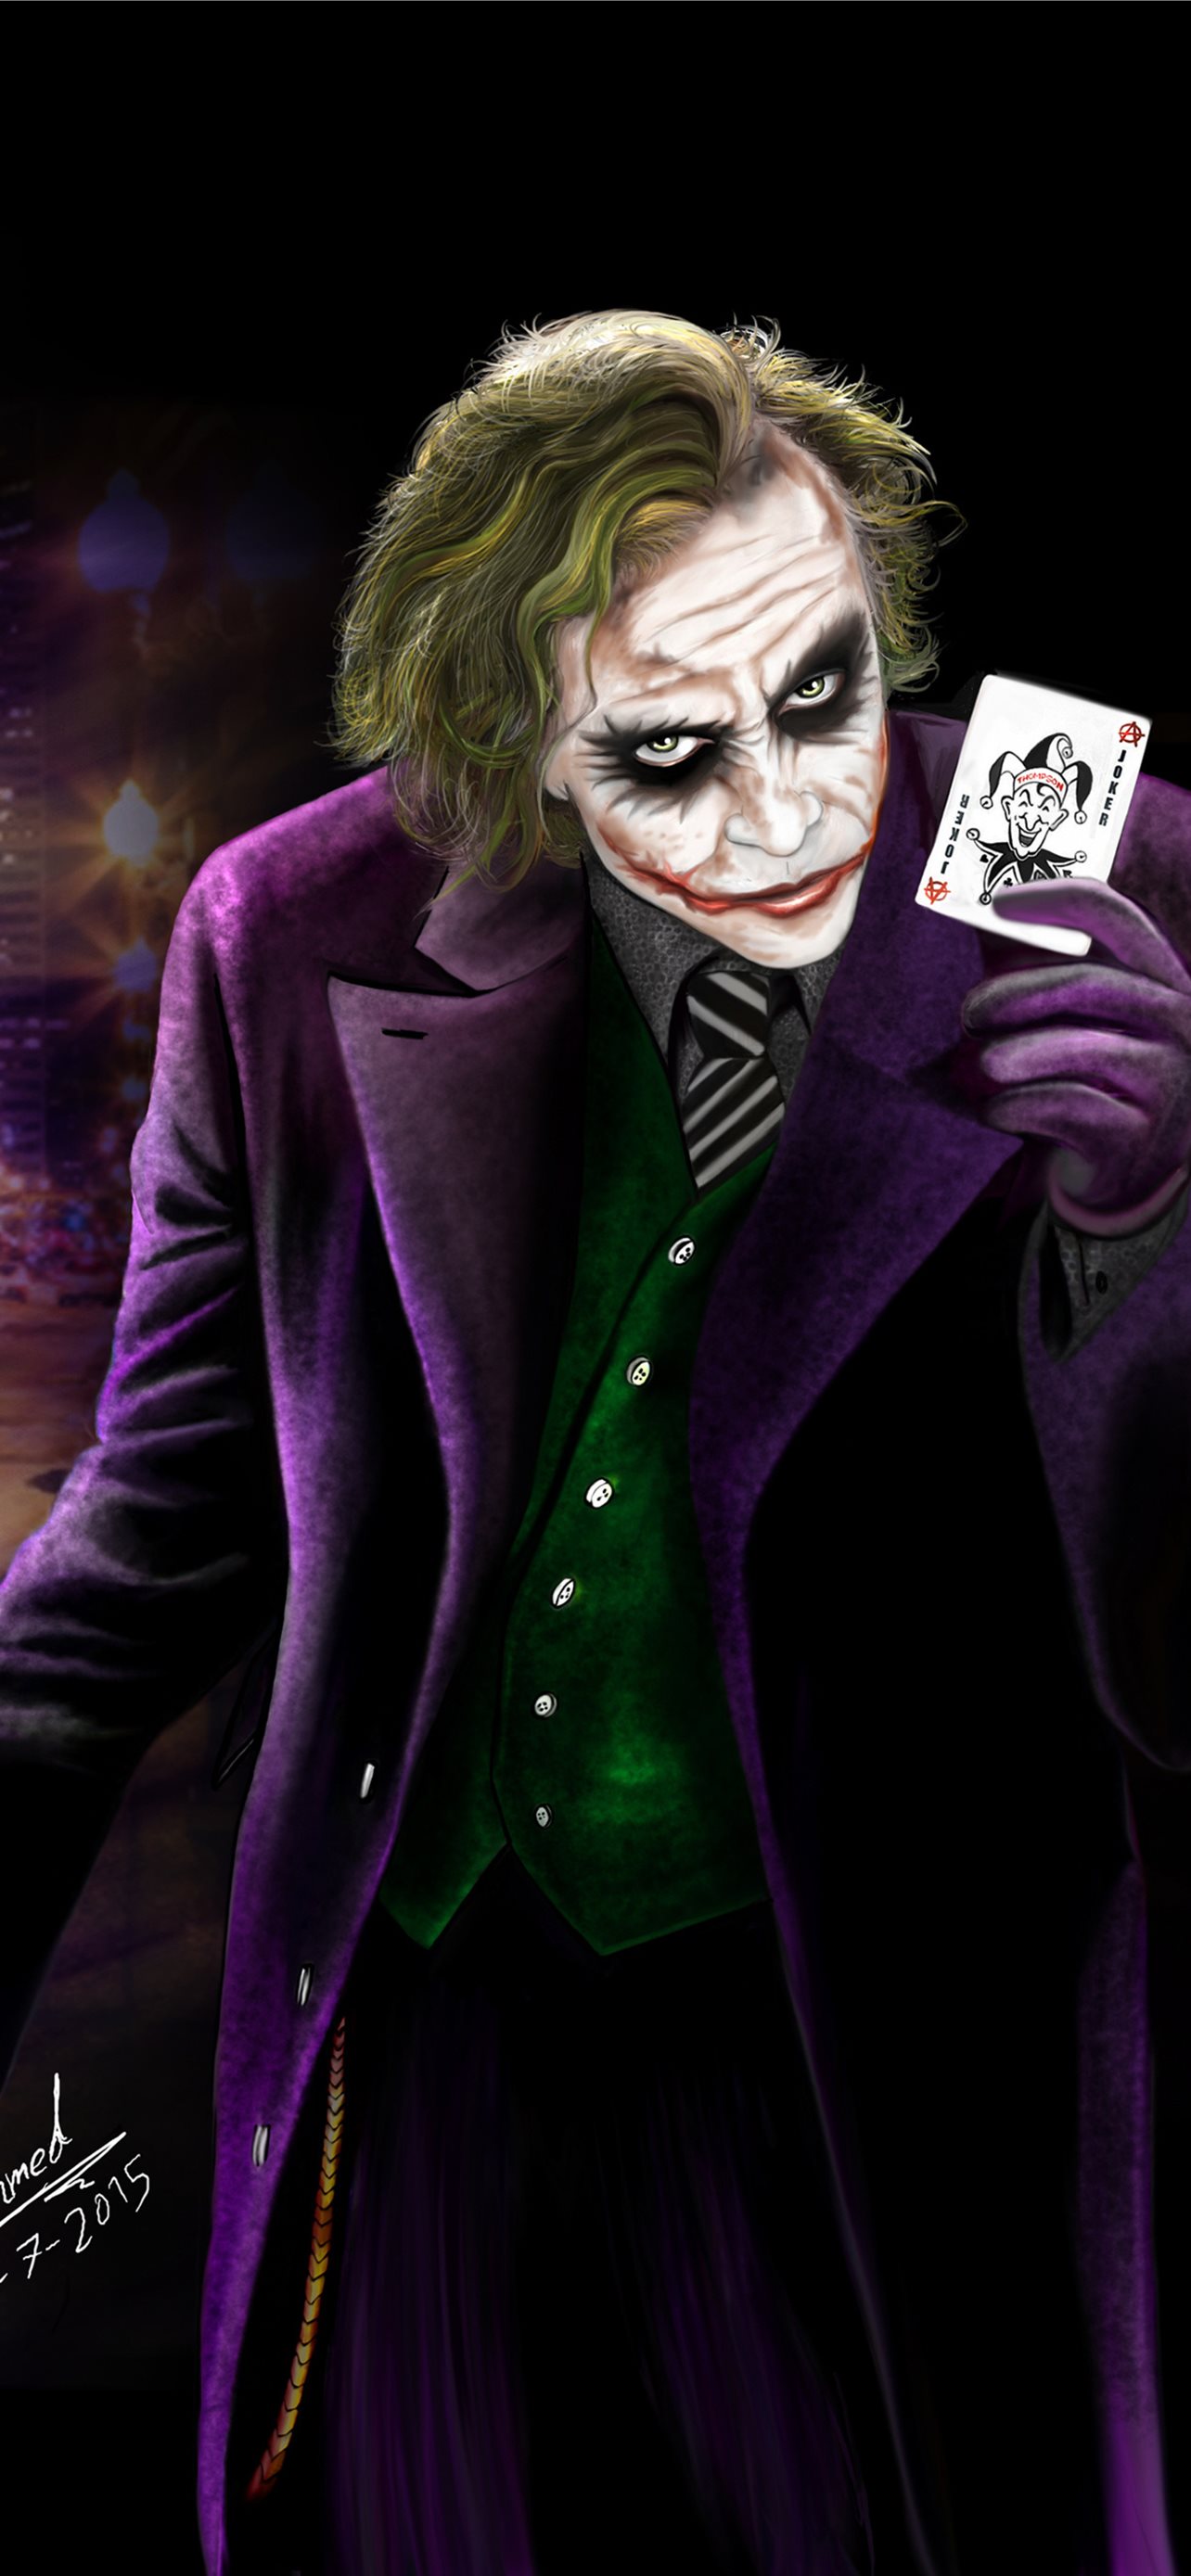 Download Free Android Wallpaper Joker  Hipster wallpaper Free android  wallpaper Joker wallpapers